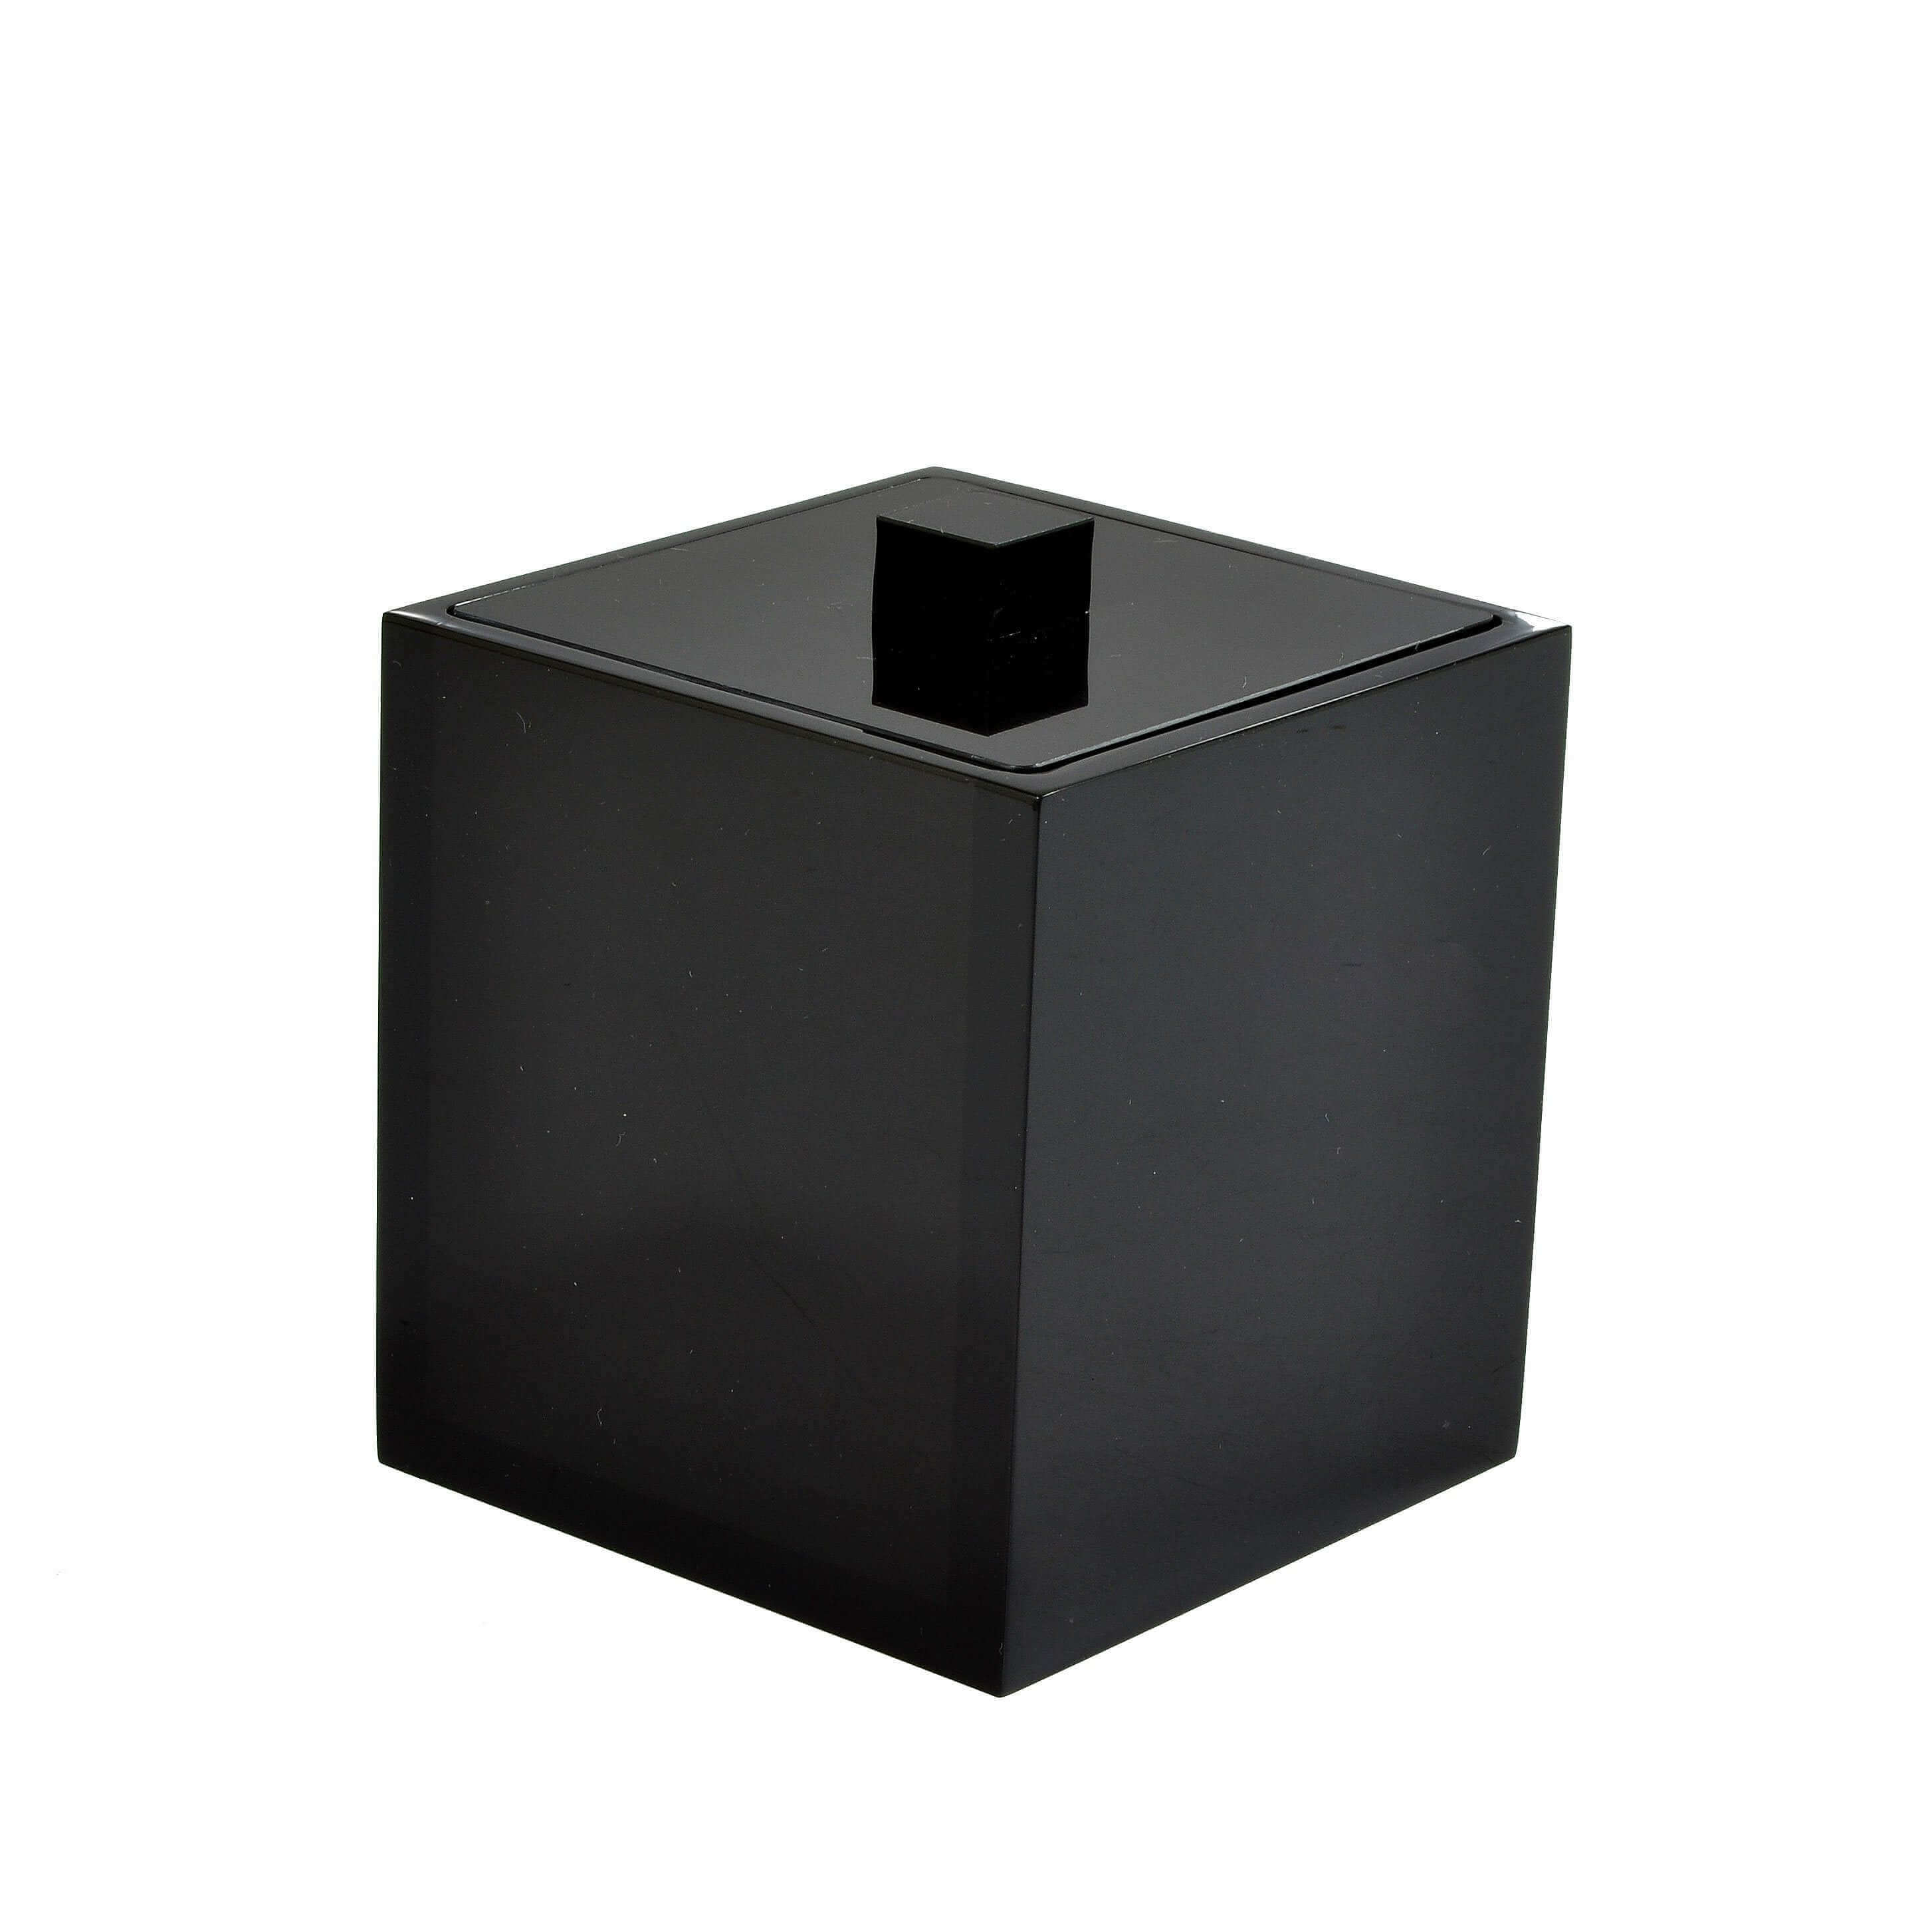 Mike + Ally - Ice Black Container - 31533 - Black - 